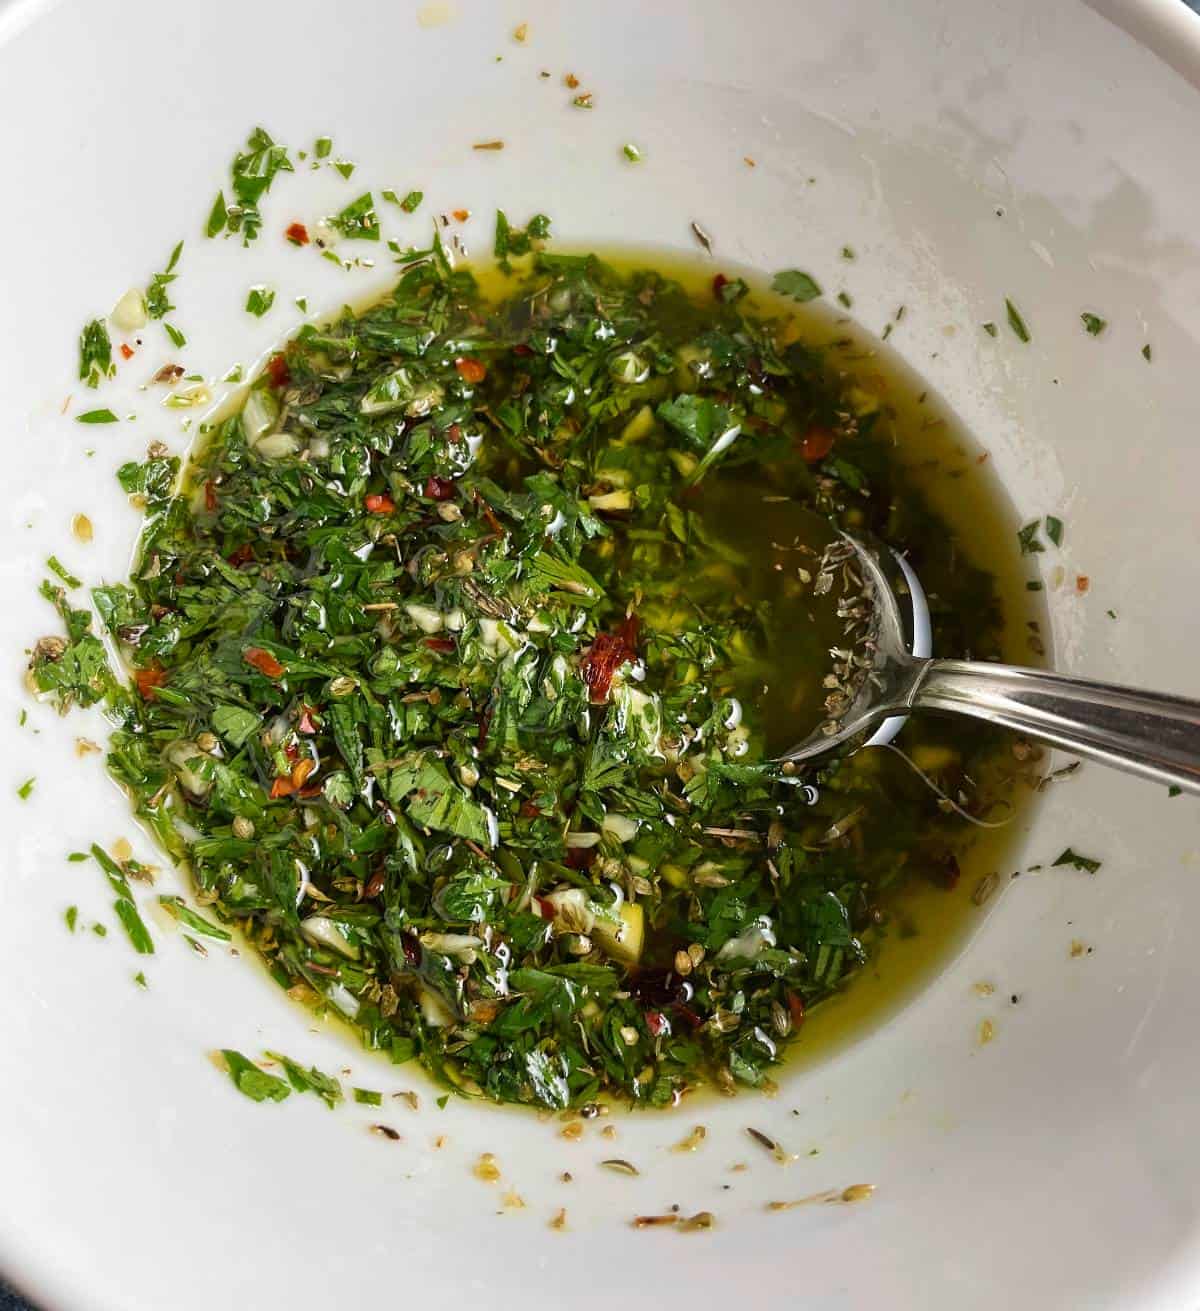 carrot top chimichurri in a while bowl, with a tablespoon dipping into the sauce.